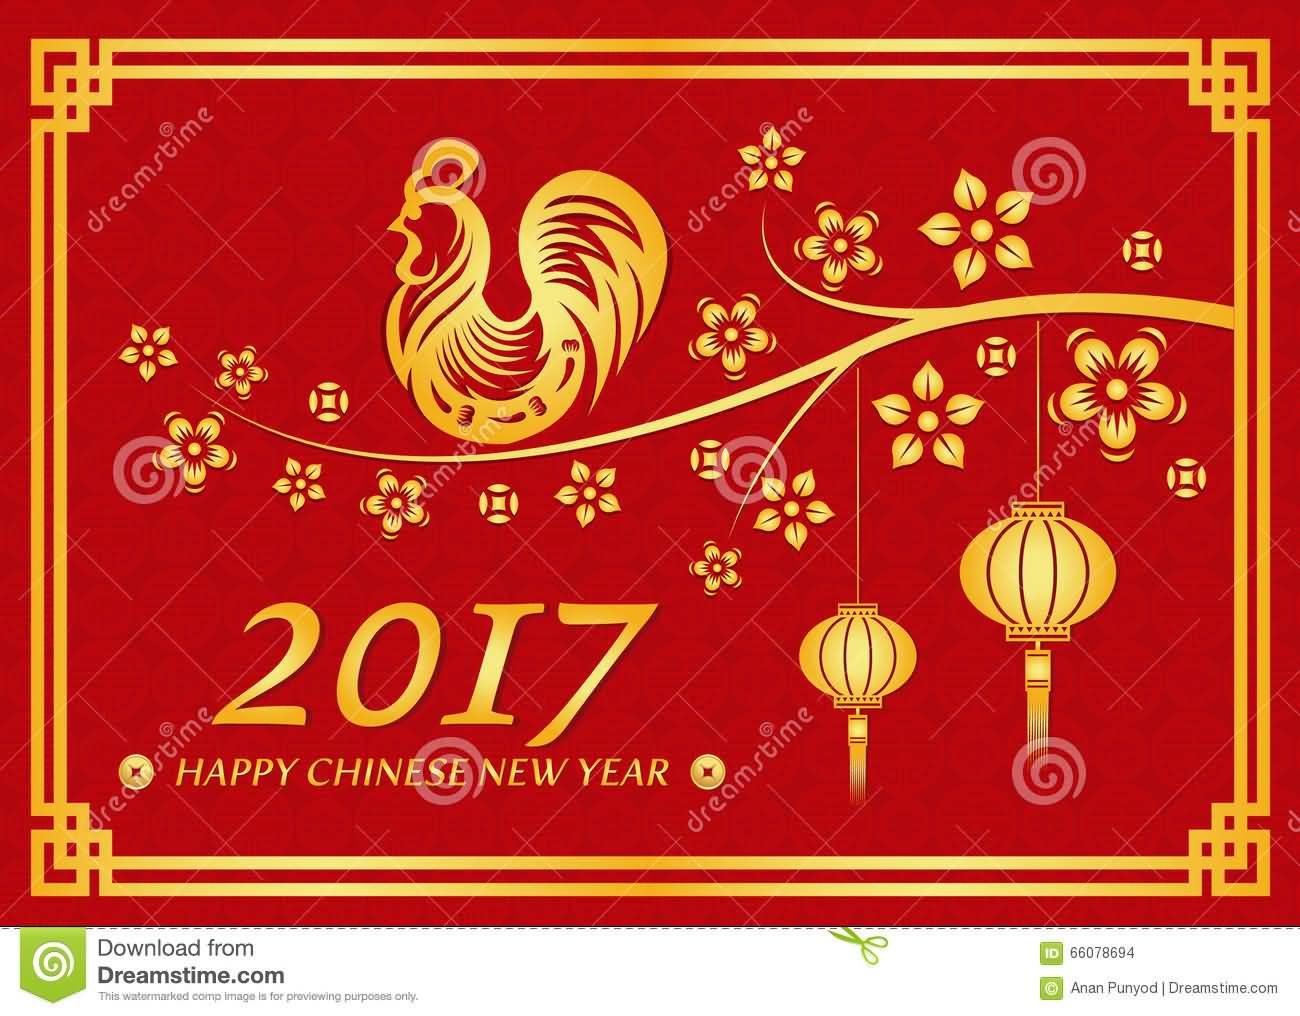 Happy Chinese New Year 2017 Card